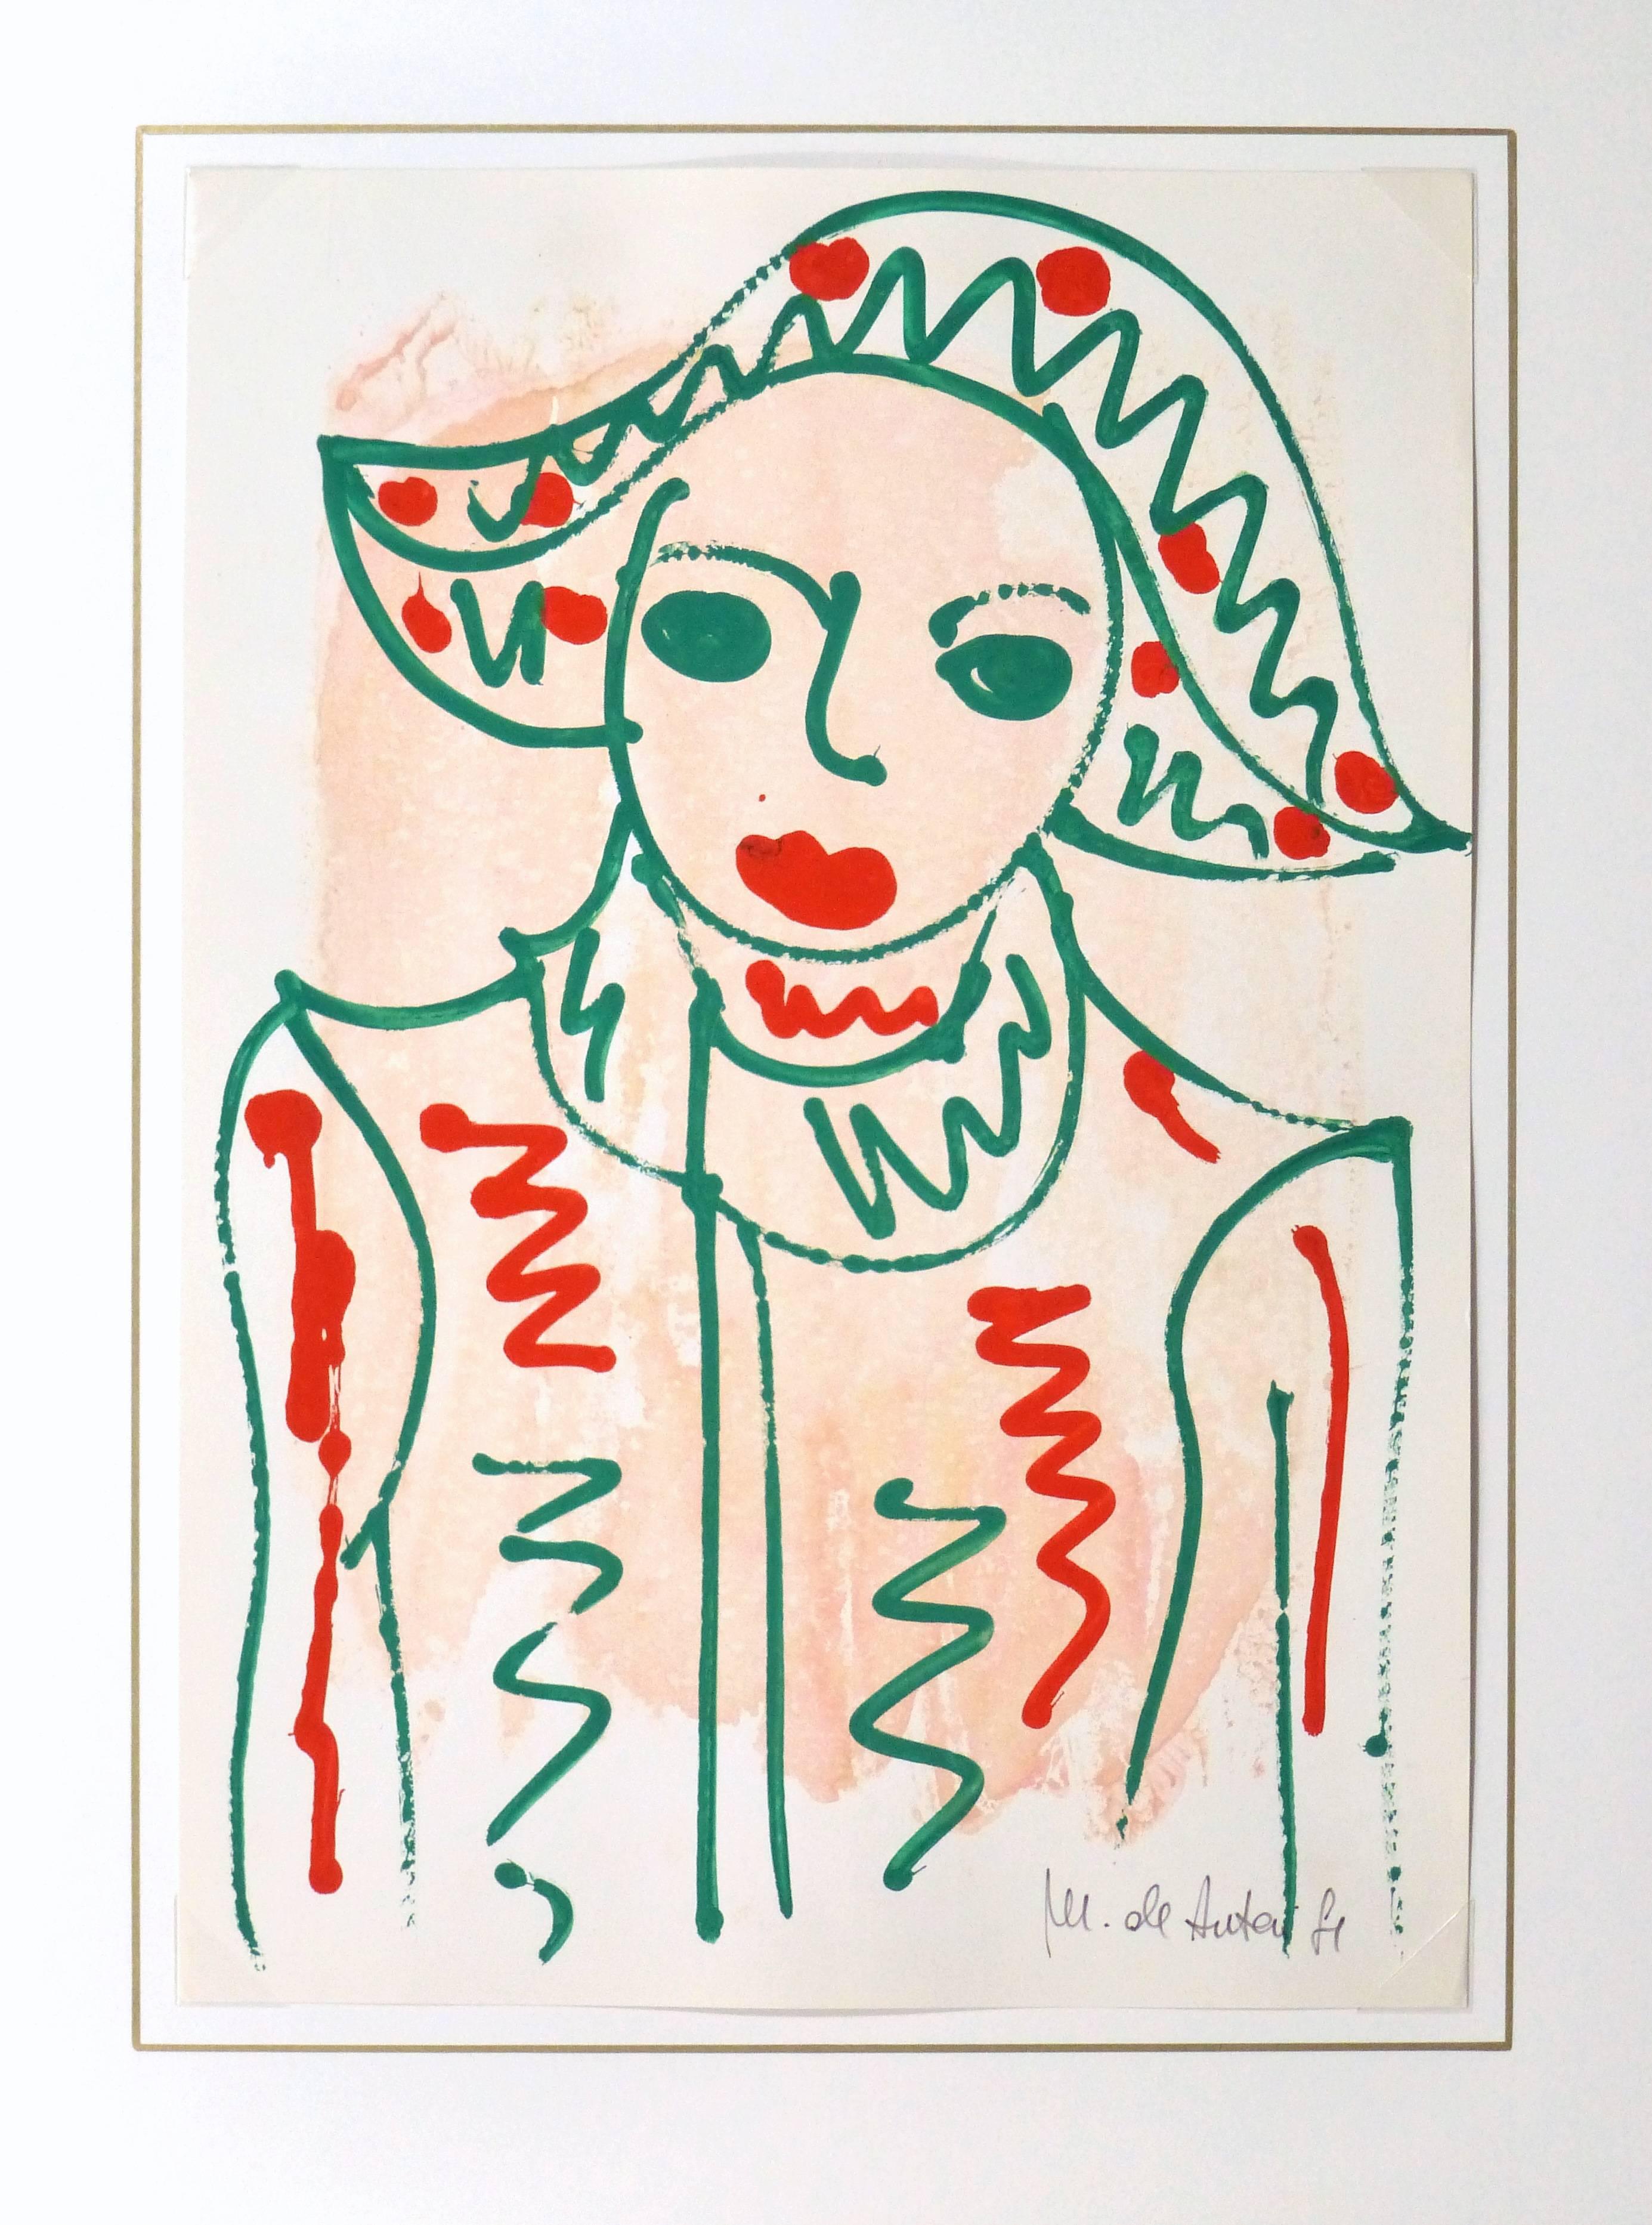 Whimsical abstract portrait in bright hues of red and green by M. DeAnteri, 1981. Signed and dated lower right.

Original artwork on paper displayed on a white mat with a gold border. Archival plastic sleeve and Certificate of Authenticity included.